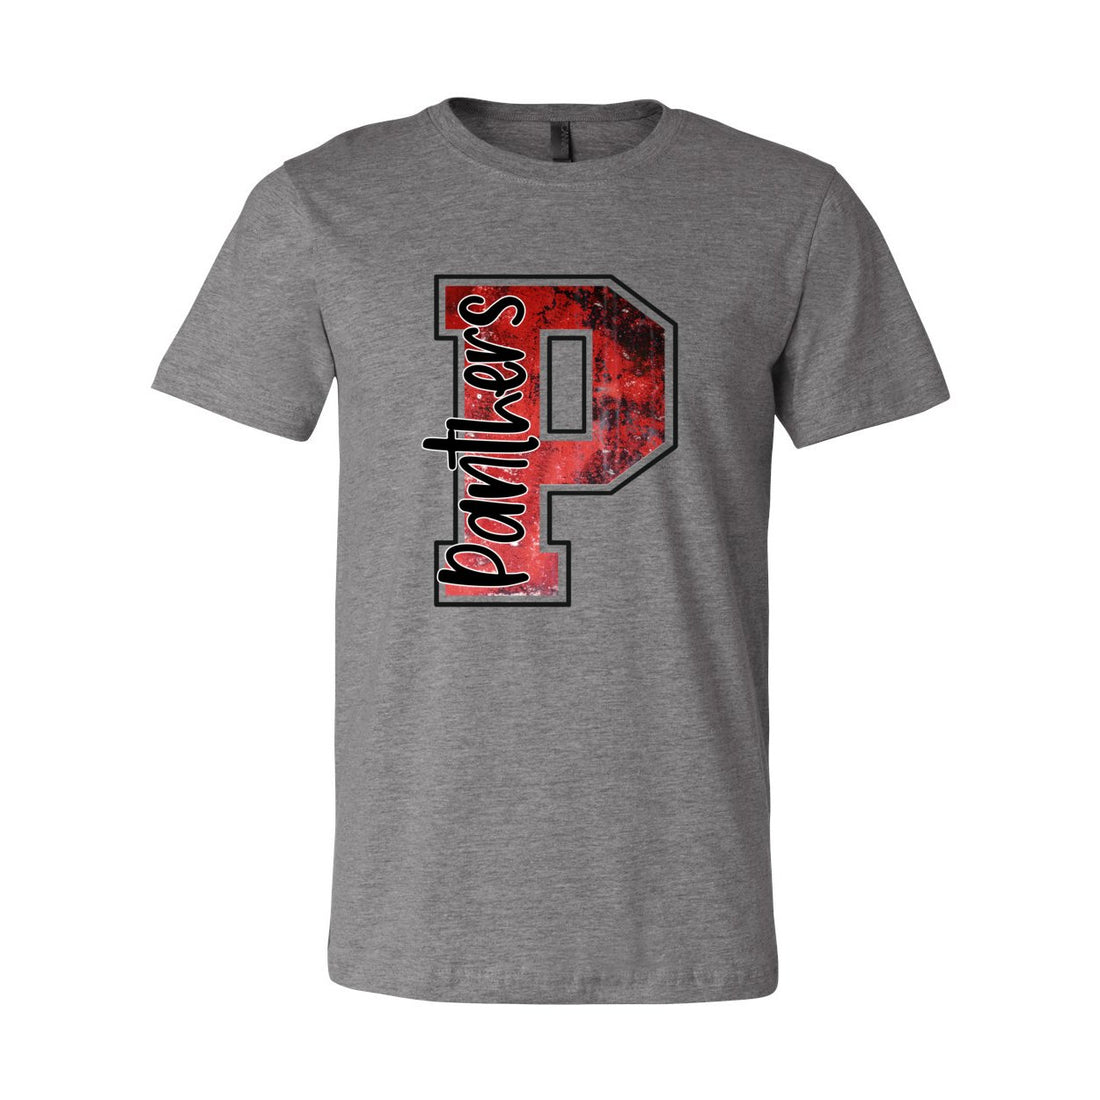 P is for Panthers Short Sleeve Jersey Tee - T-Shirts - Positively Sassy - P is for Panthers Short Sleeve Jersey Tee